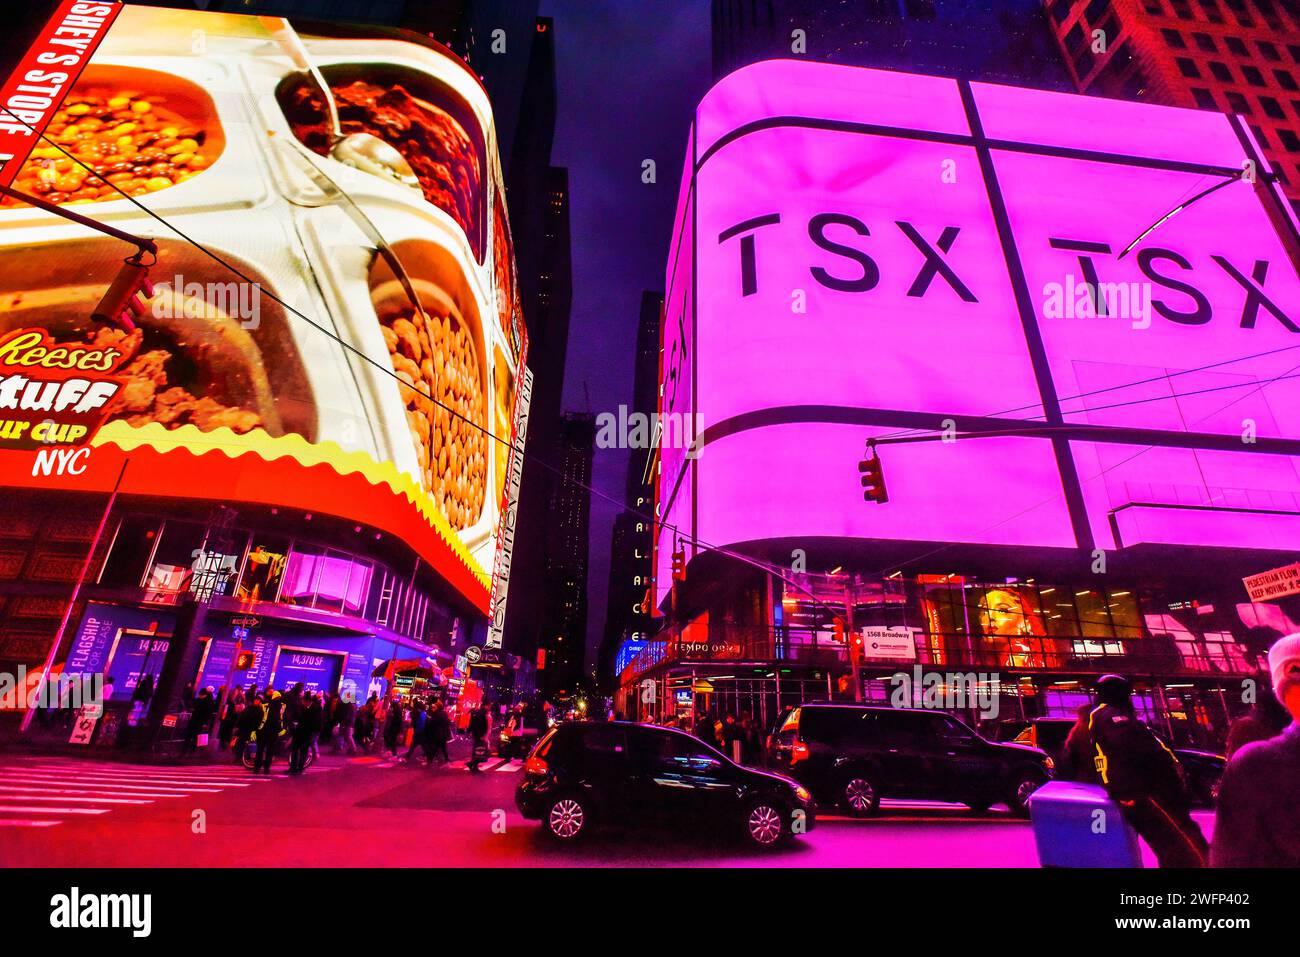 Times Square at night with lighted billboards Stock Photo